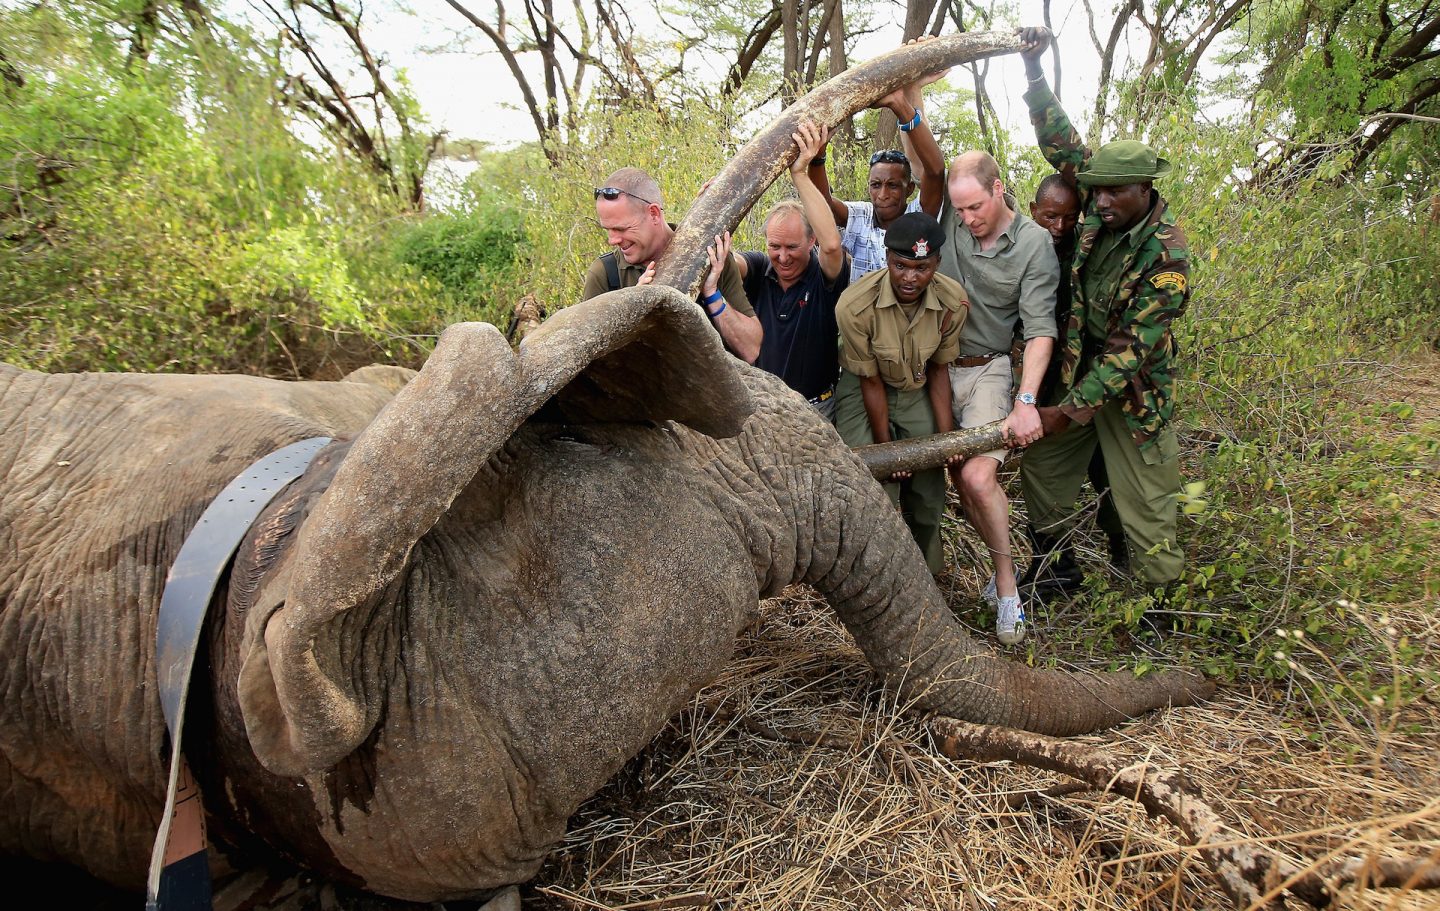 Charlie Mayhew, Prince William and Rangers with Elephant in Lewa on March 24, 2016 in Lewa, Kenya.